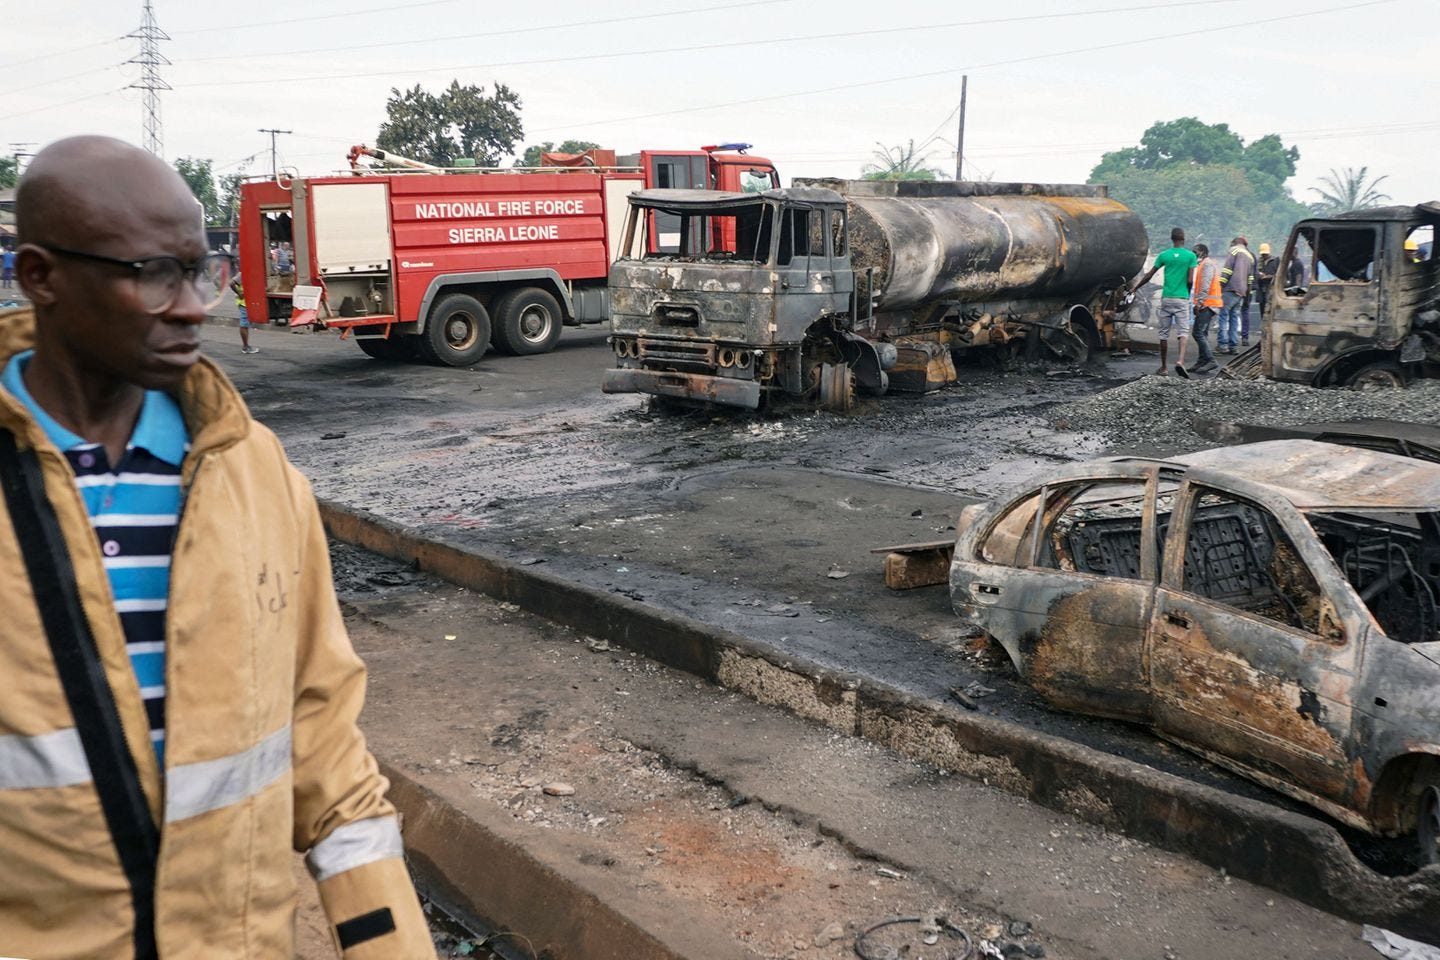 A man walked past burned vehicles in Freetown on Saturday, following a massive explosion that killed more than 90 people.